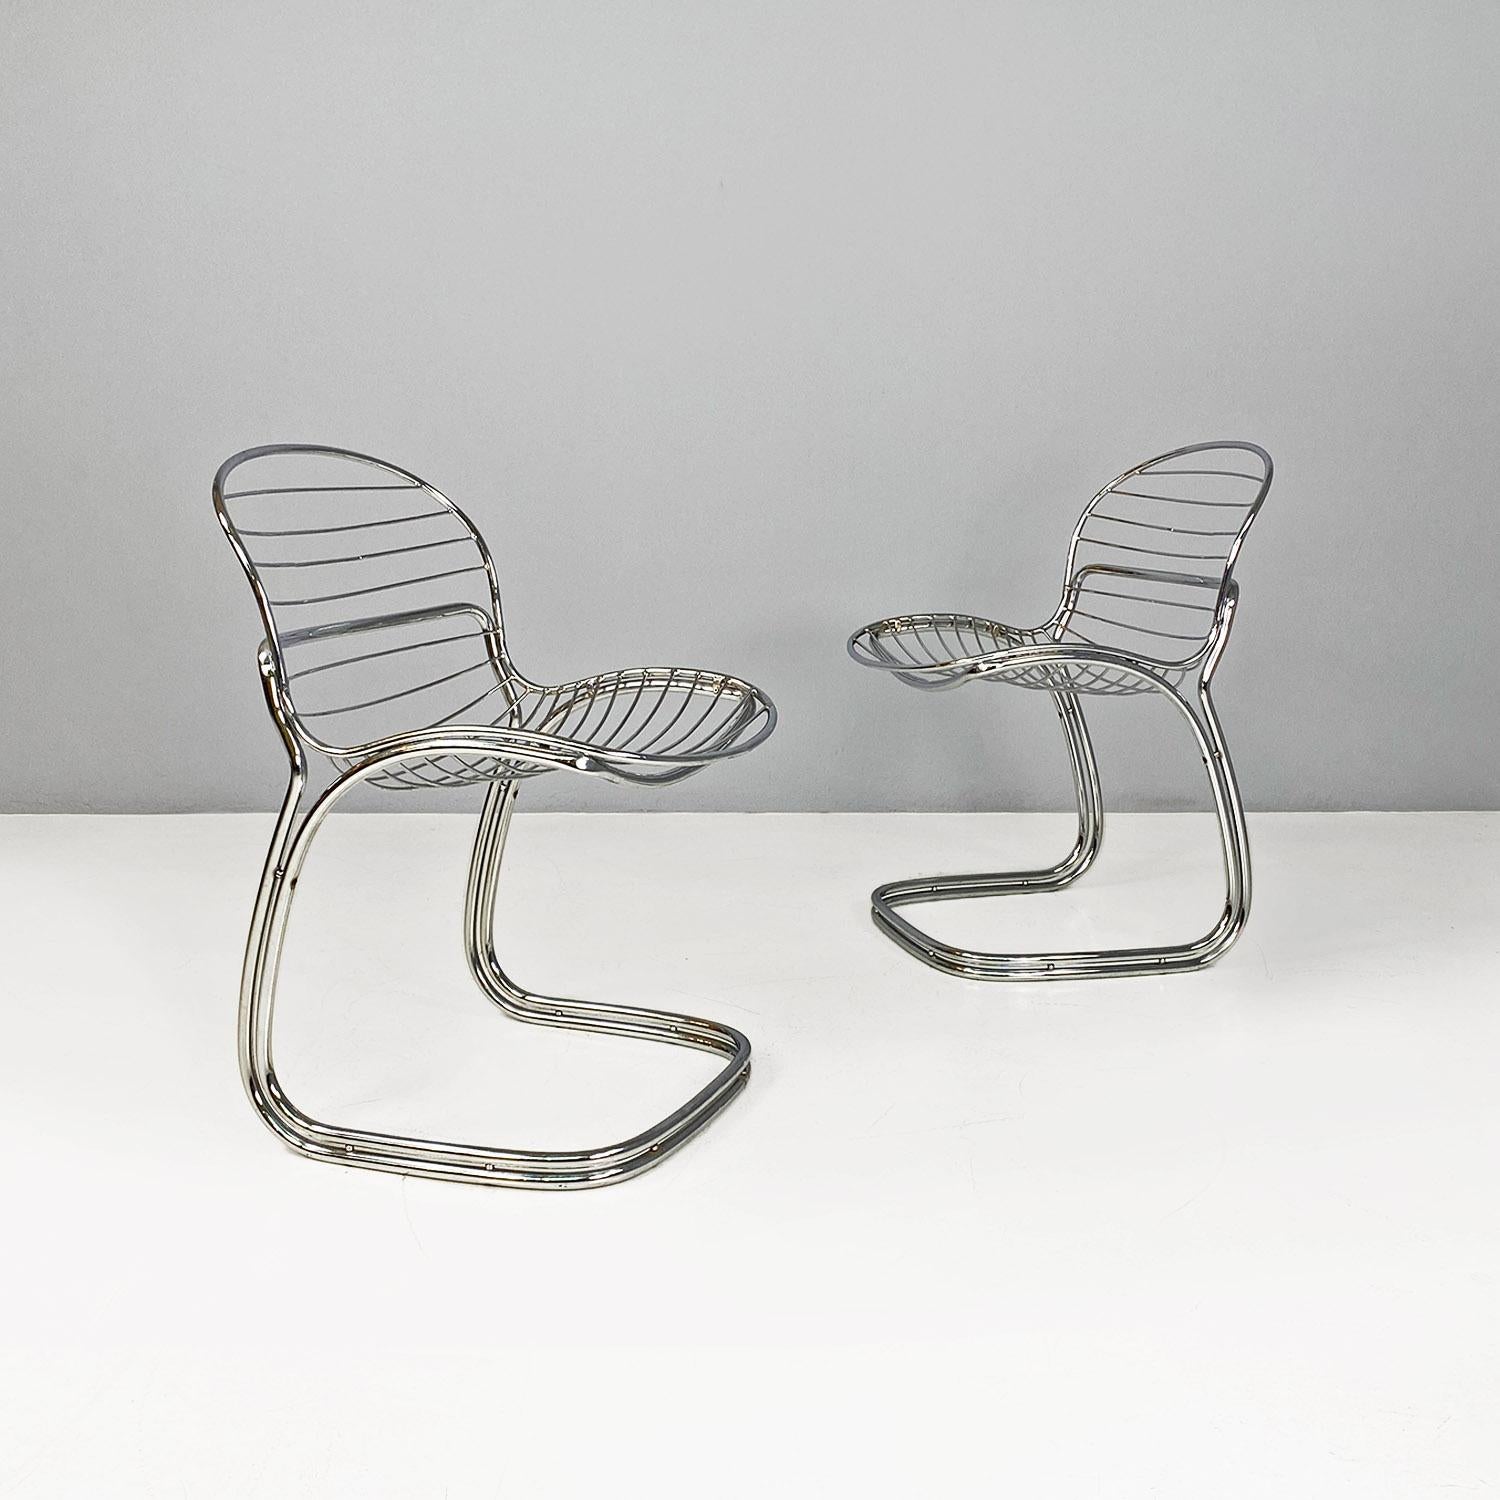 Italian modern chromed steel Sabrina chairs by Gastone Rinaldi for Rima, 1970s
Pair of Sabrina model chairs, with seat and backrest made entirely of fine chromed steel tubing, which follows the shape of the body.
Produced by Rima in approx. 1970.